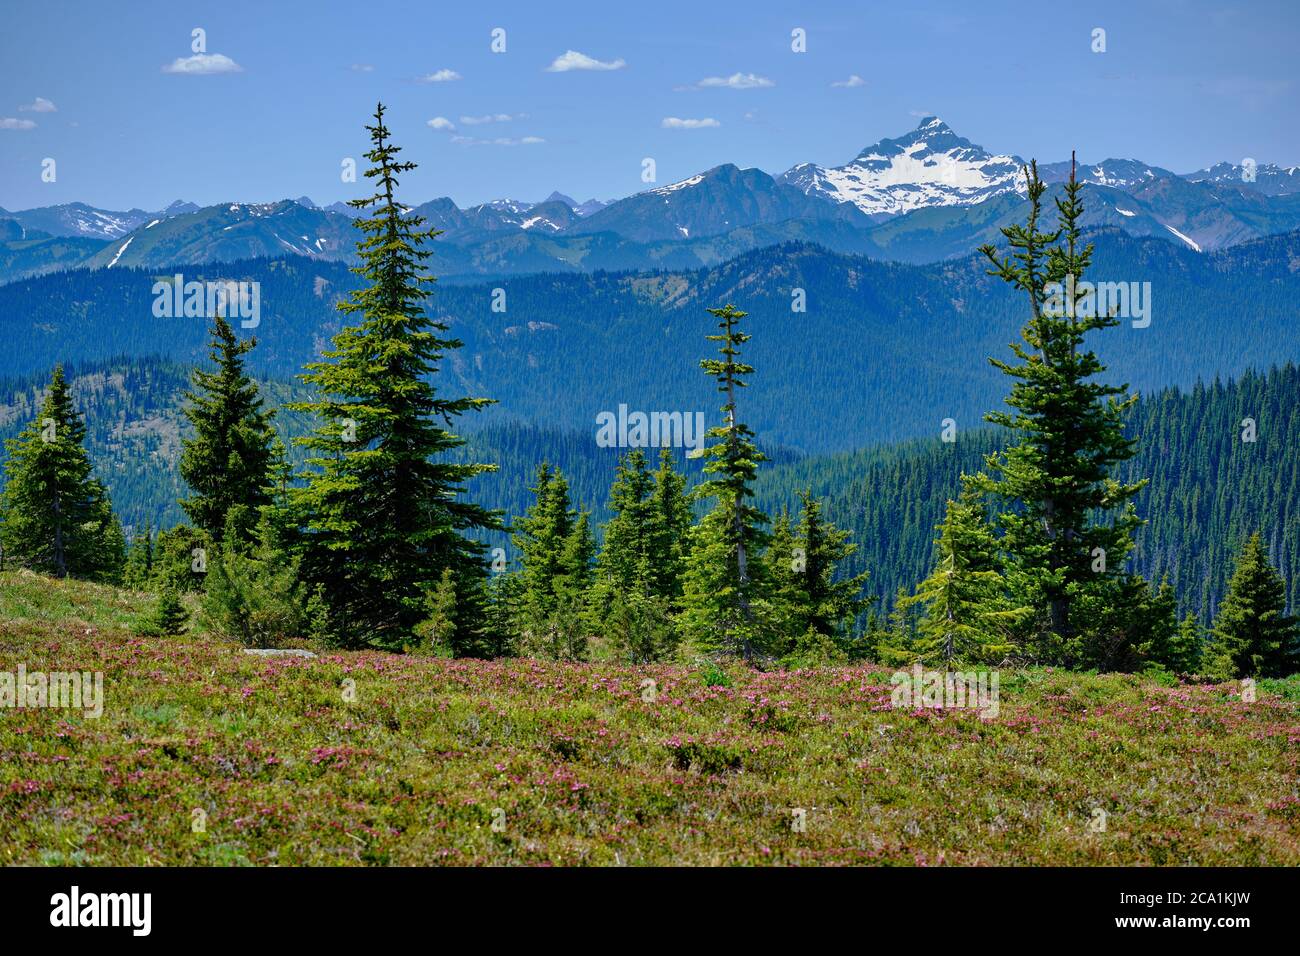 Looking over several forested ridges towards the North Cascades of Washington State from the Heather Trail in Manning Park, BC Stock Photo